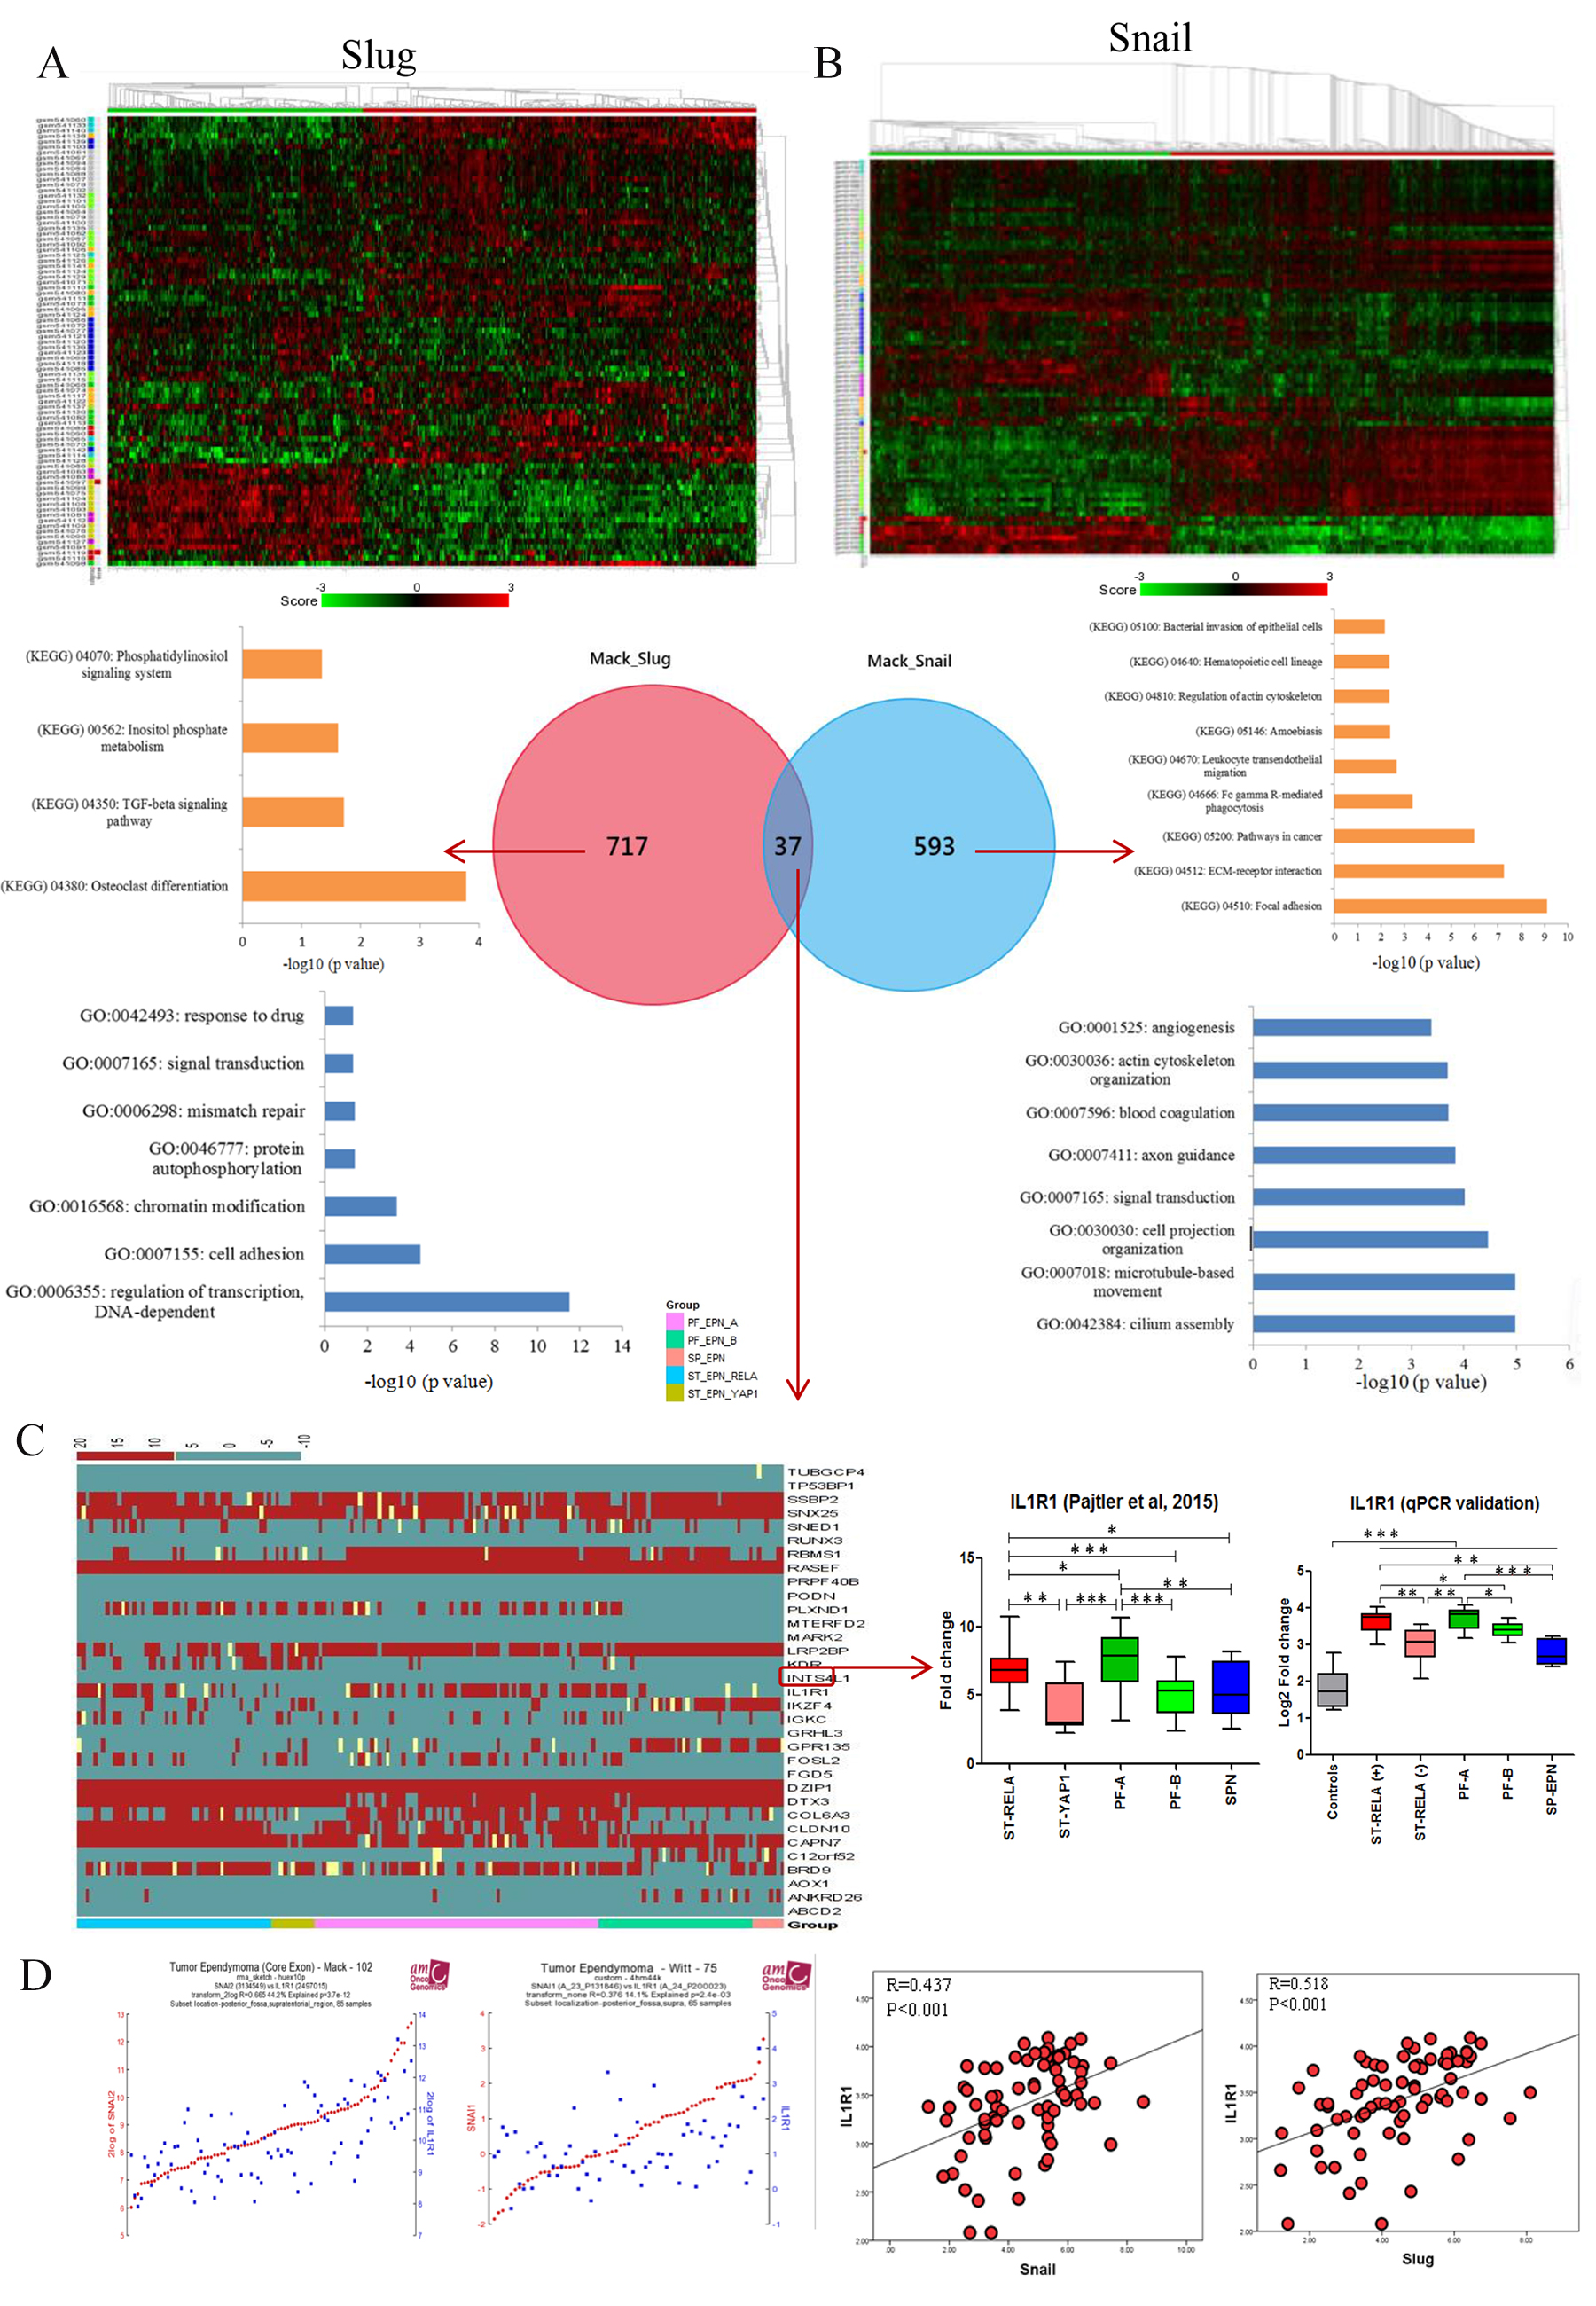 Co-expression network analysis of Snail and Slug and identification of IL1R1.